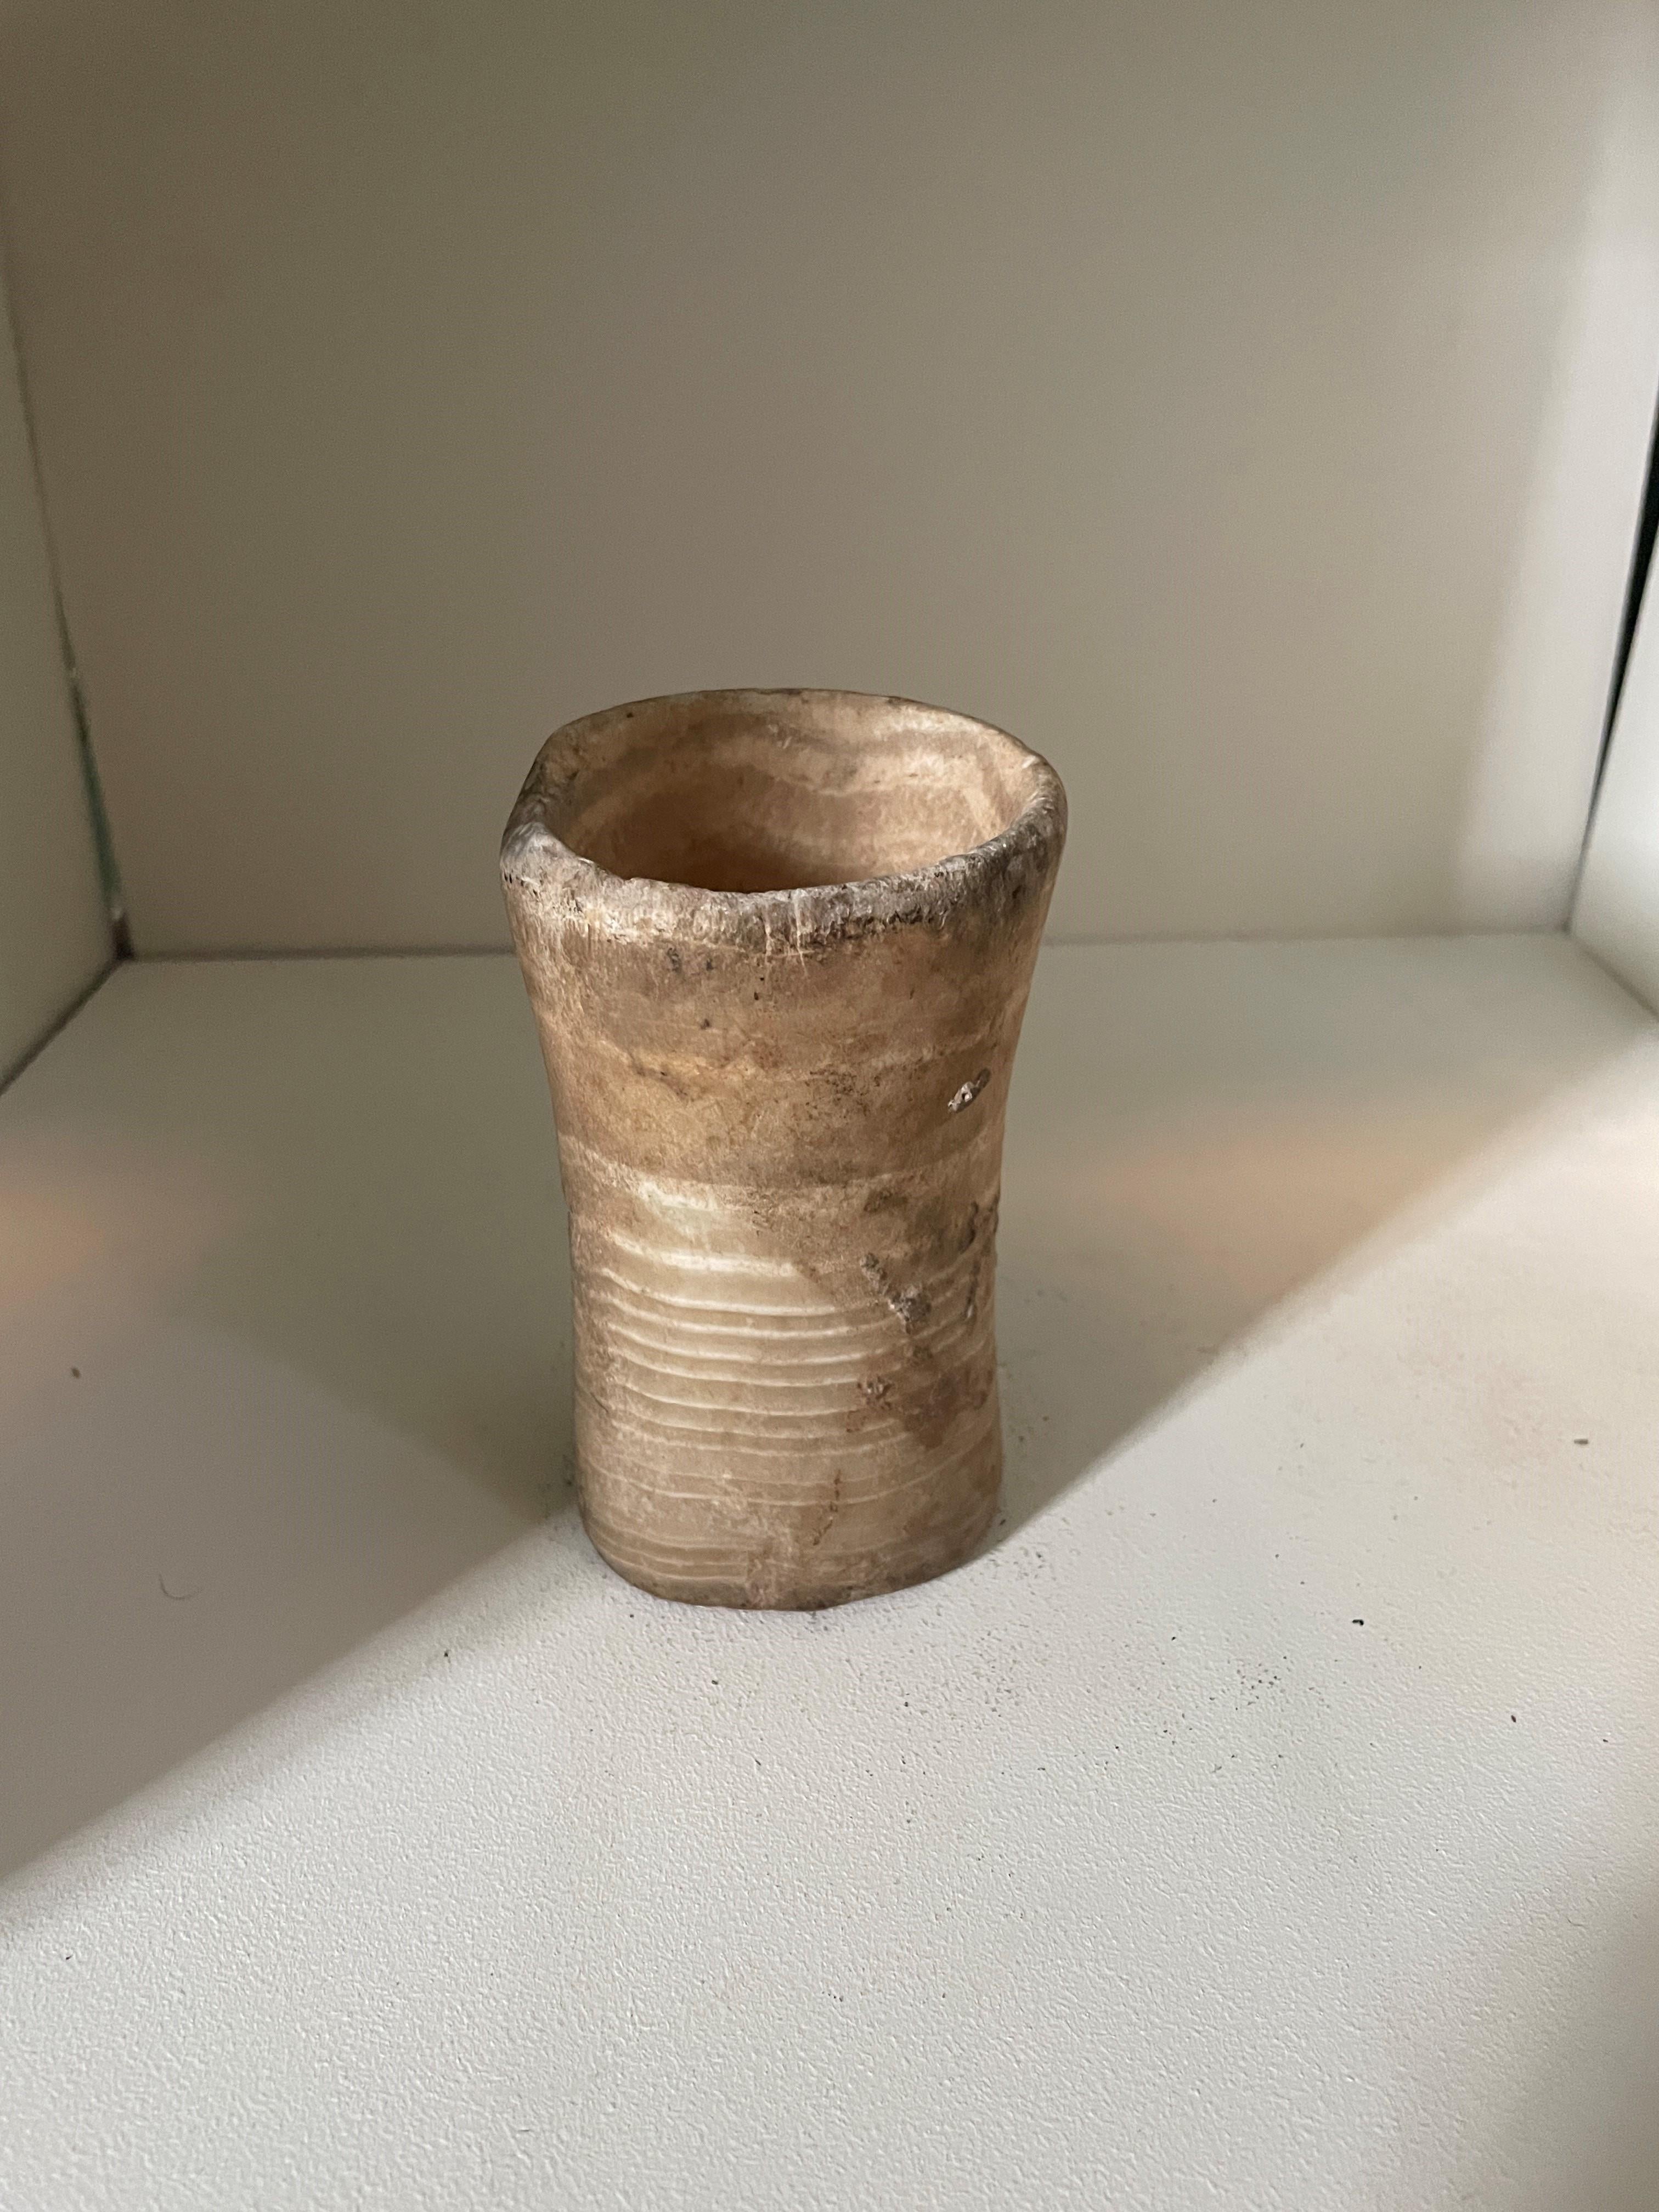 Bactrian Alabaster offering vessel, second millennium BC, A small veined alabaster vessel with asymmetric waisted cylindrical form. The interior half way down in a U boul. Composite residue in and outside the vessel. Beautiful veining with typical